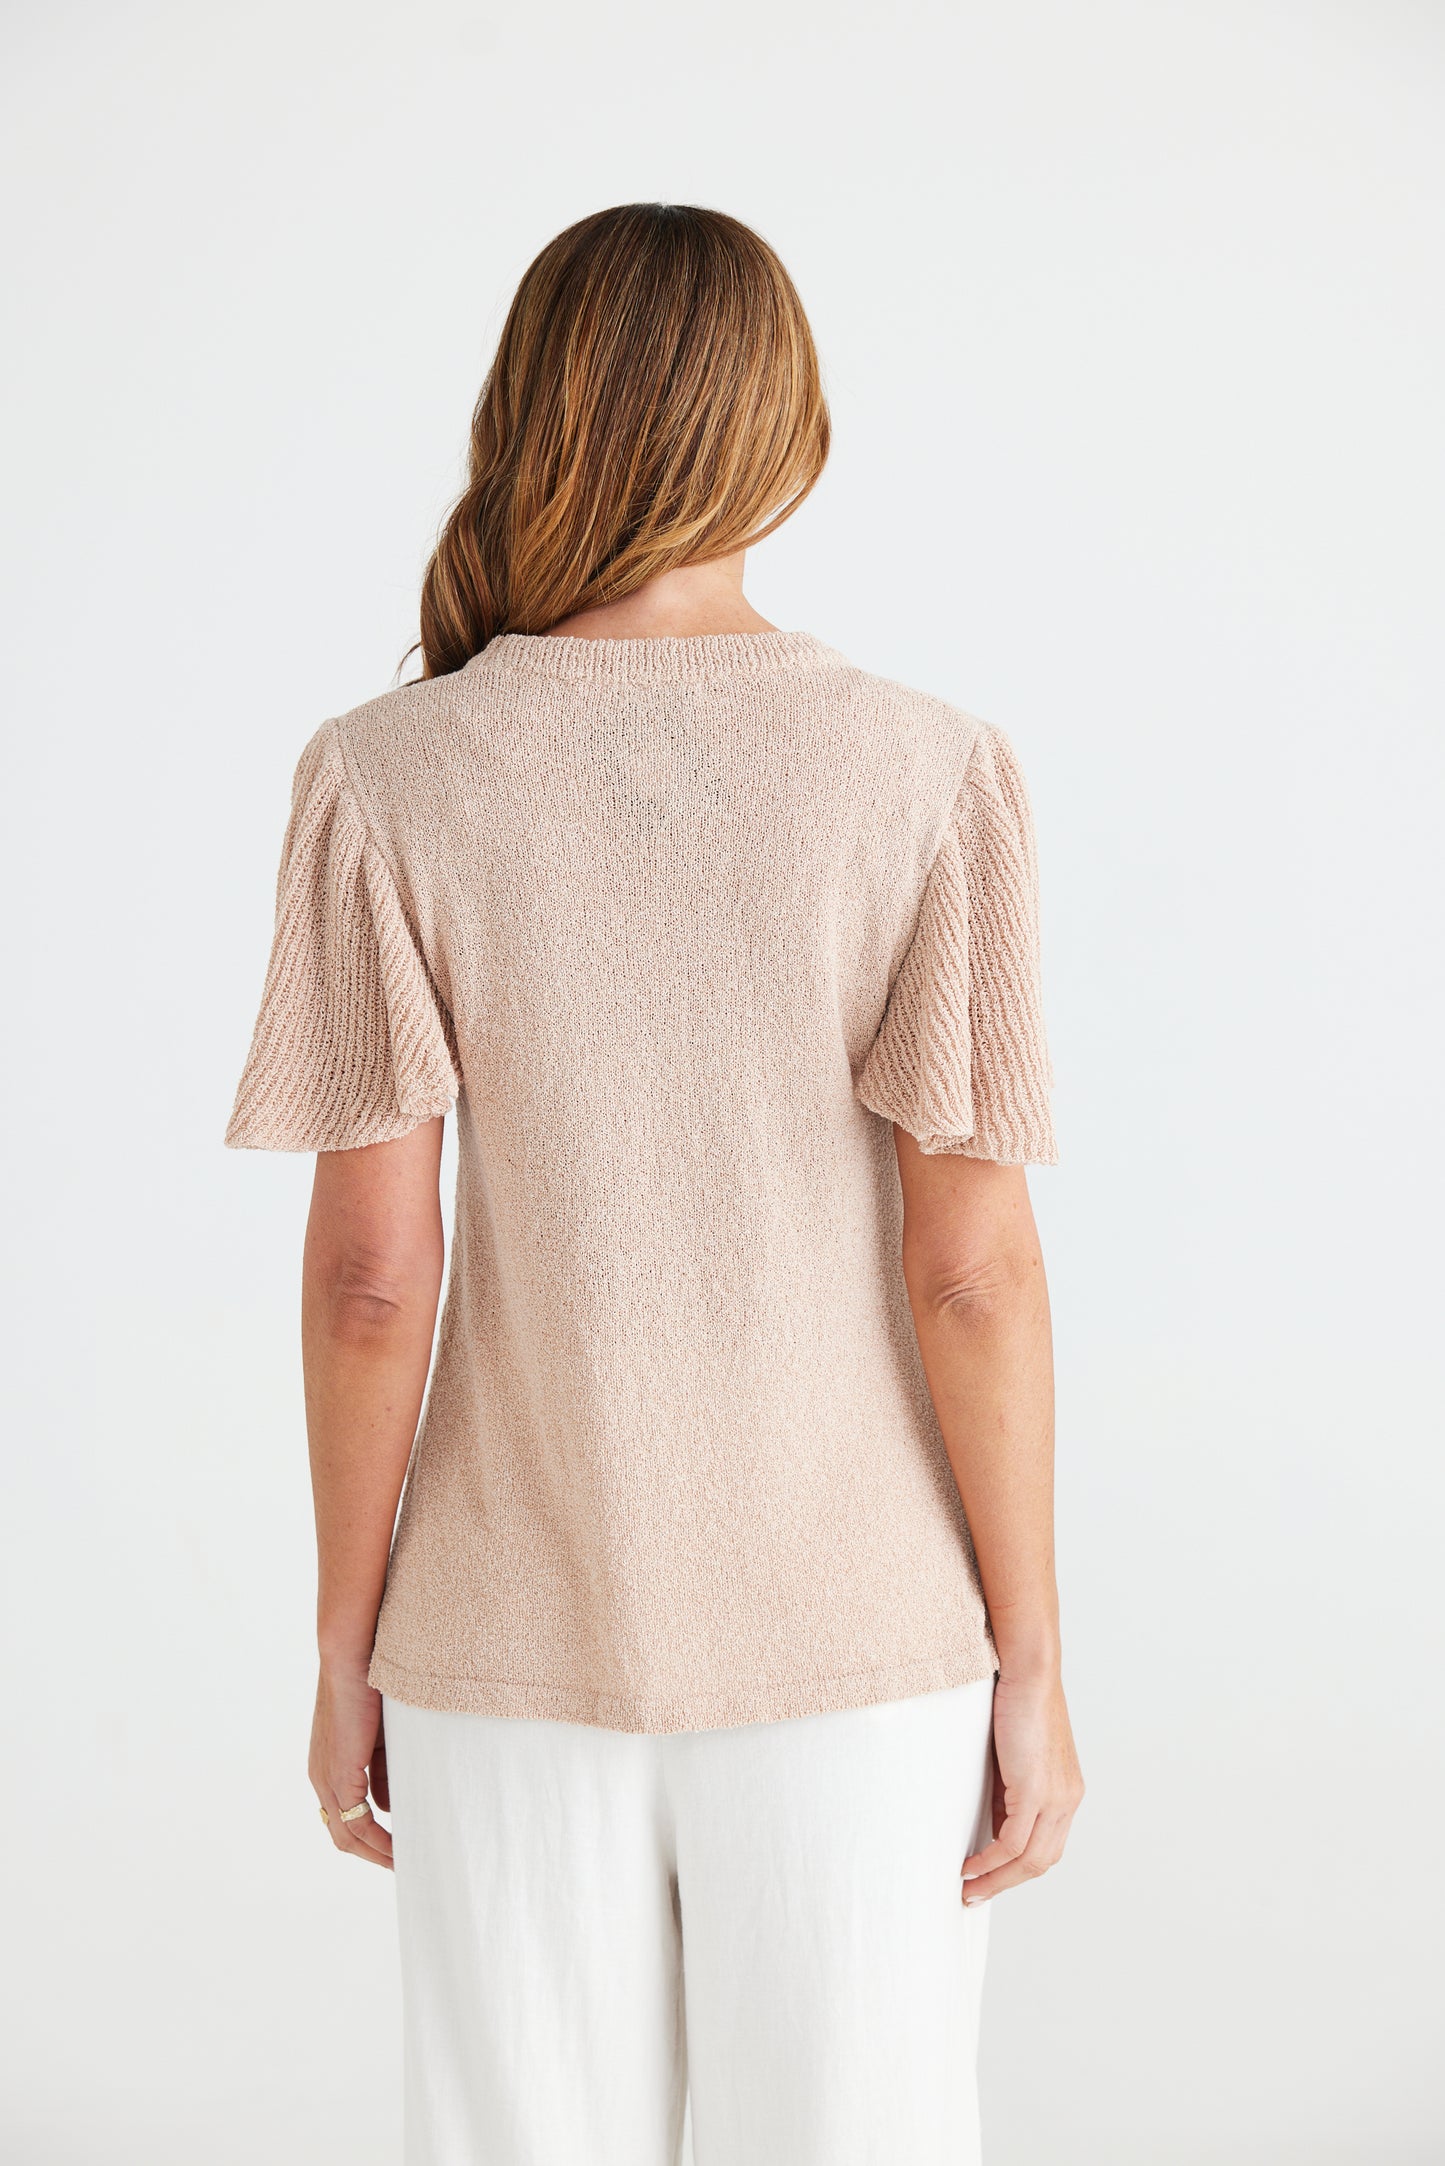 Brave and True Manderly Knit Top - Oat Marle